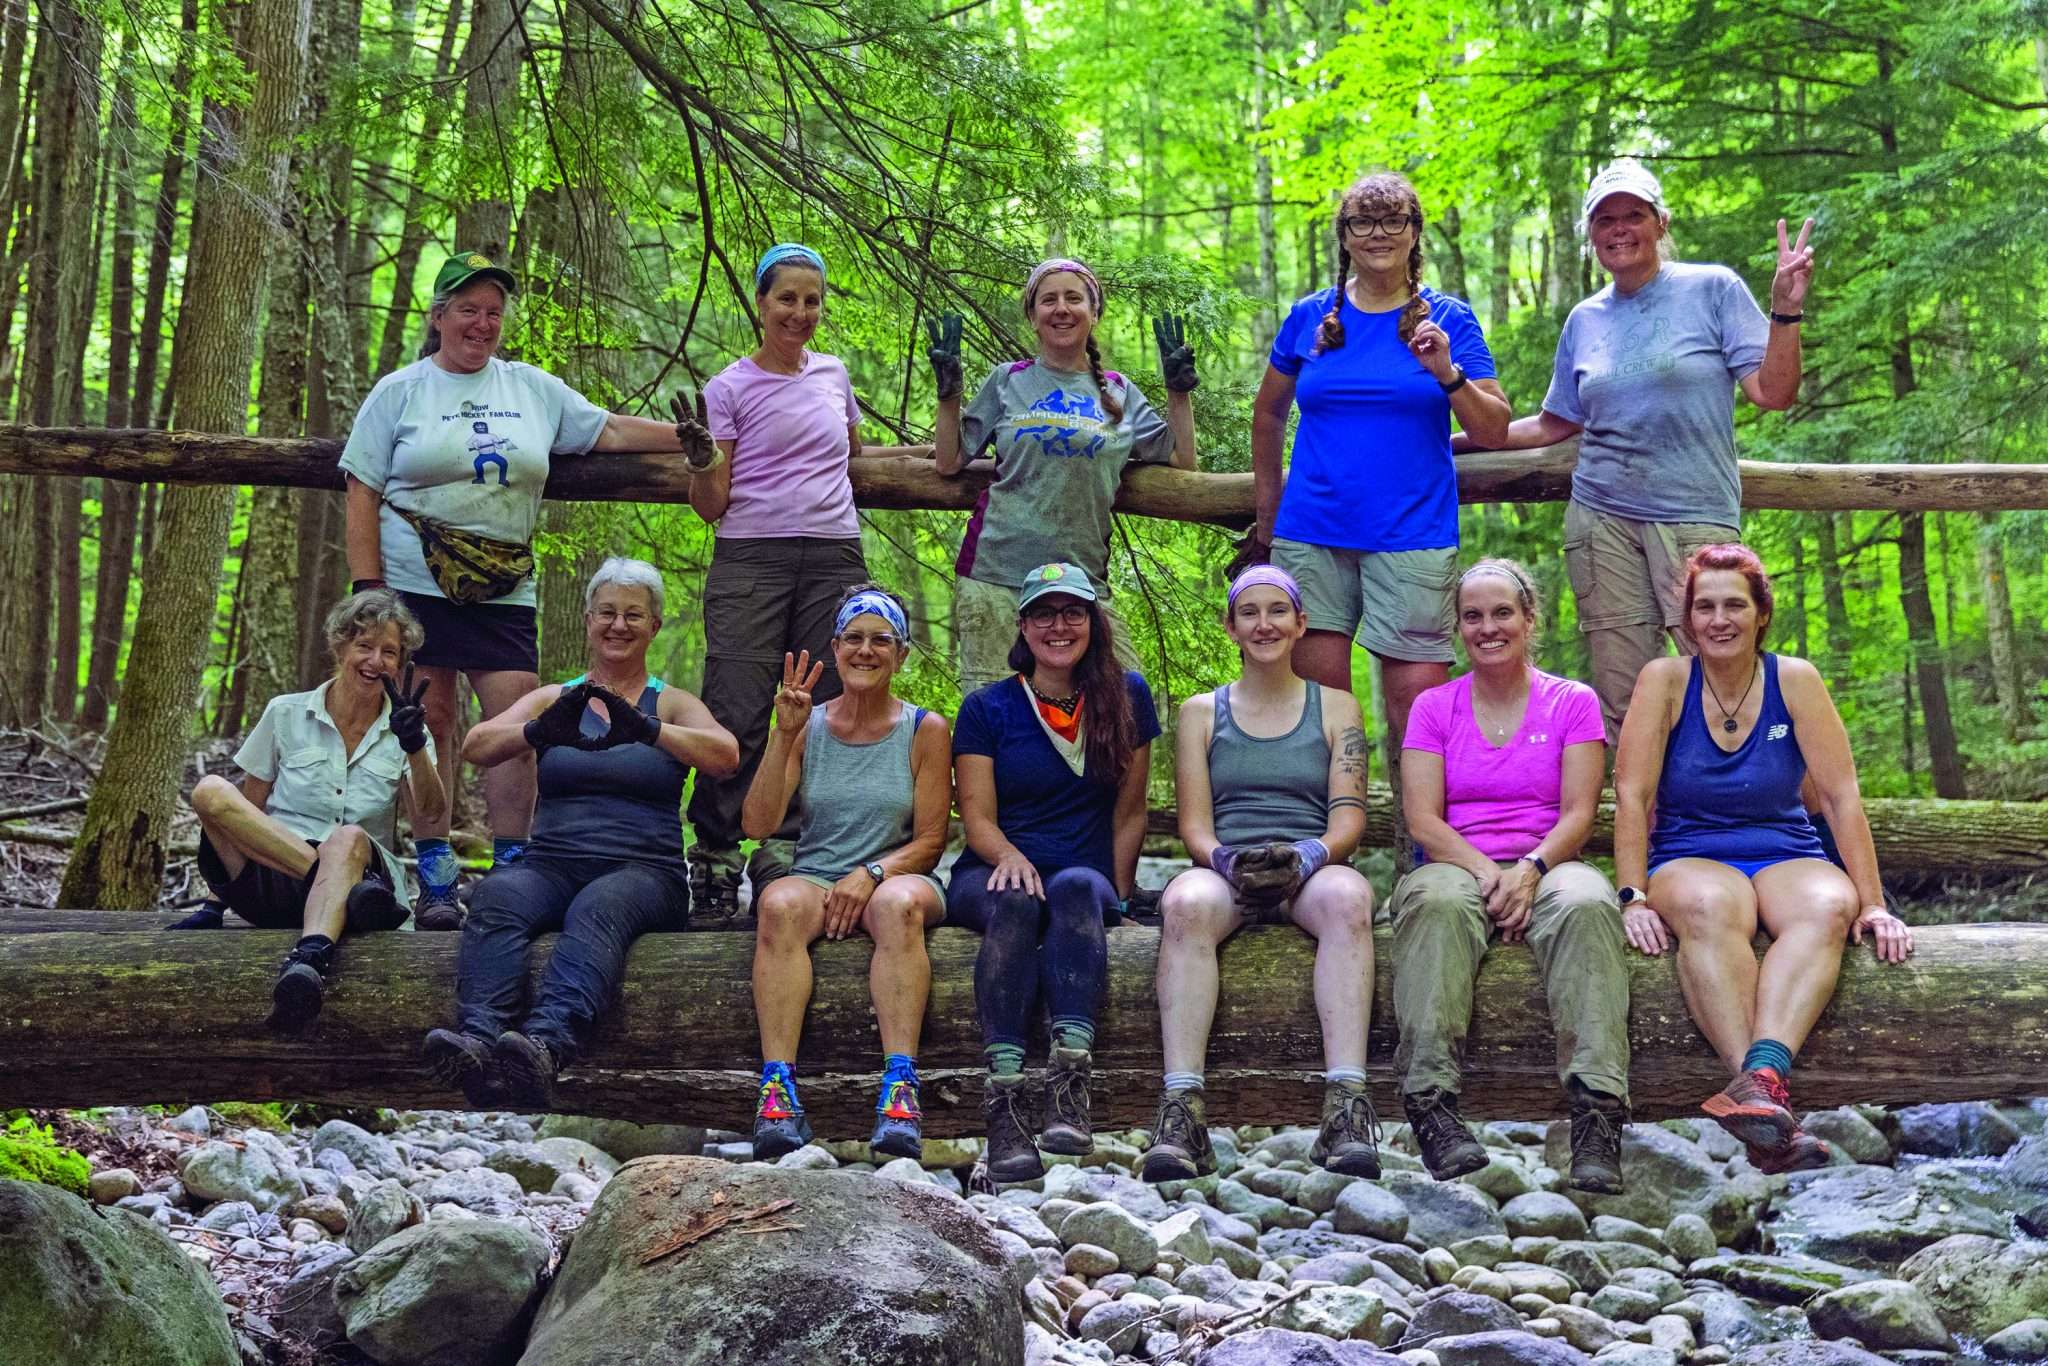 Women 46ers on a work trip in the Central Adirondacks